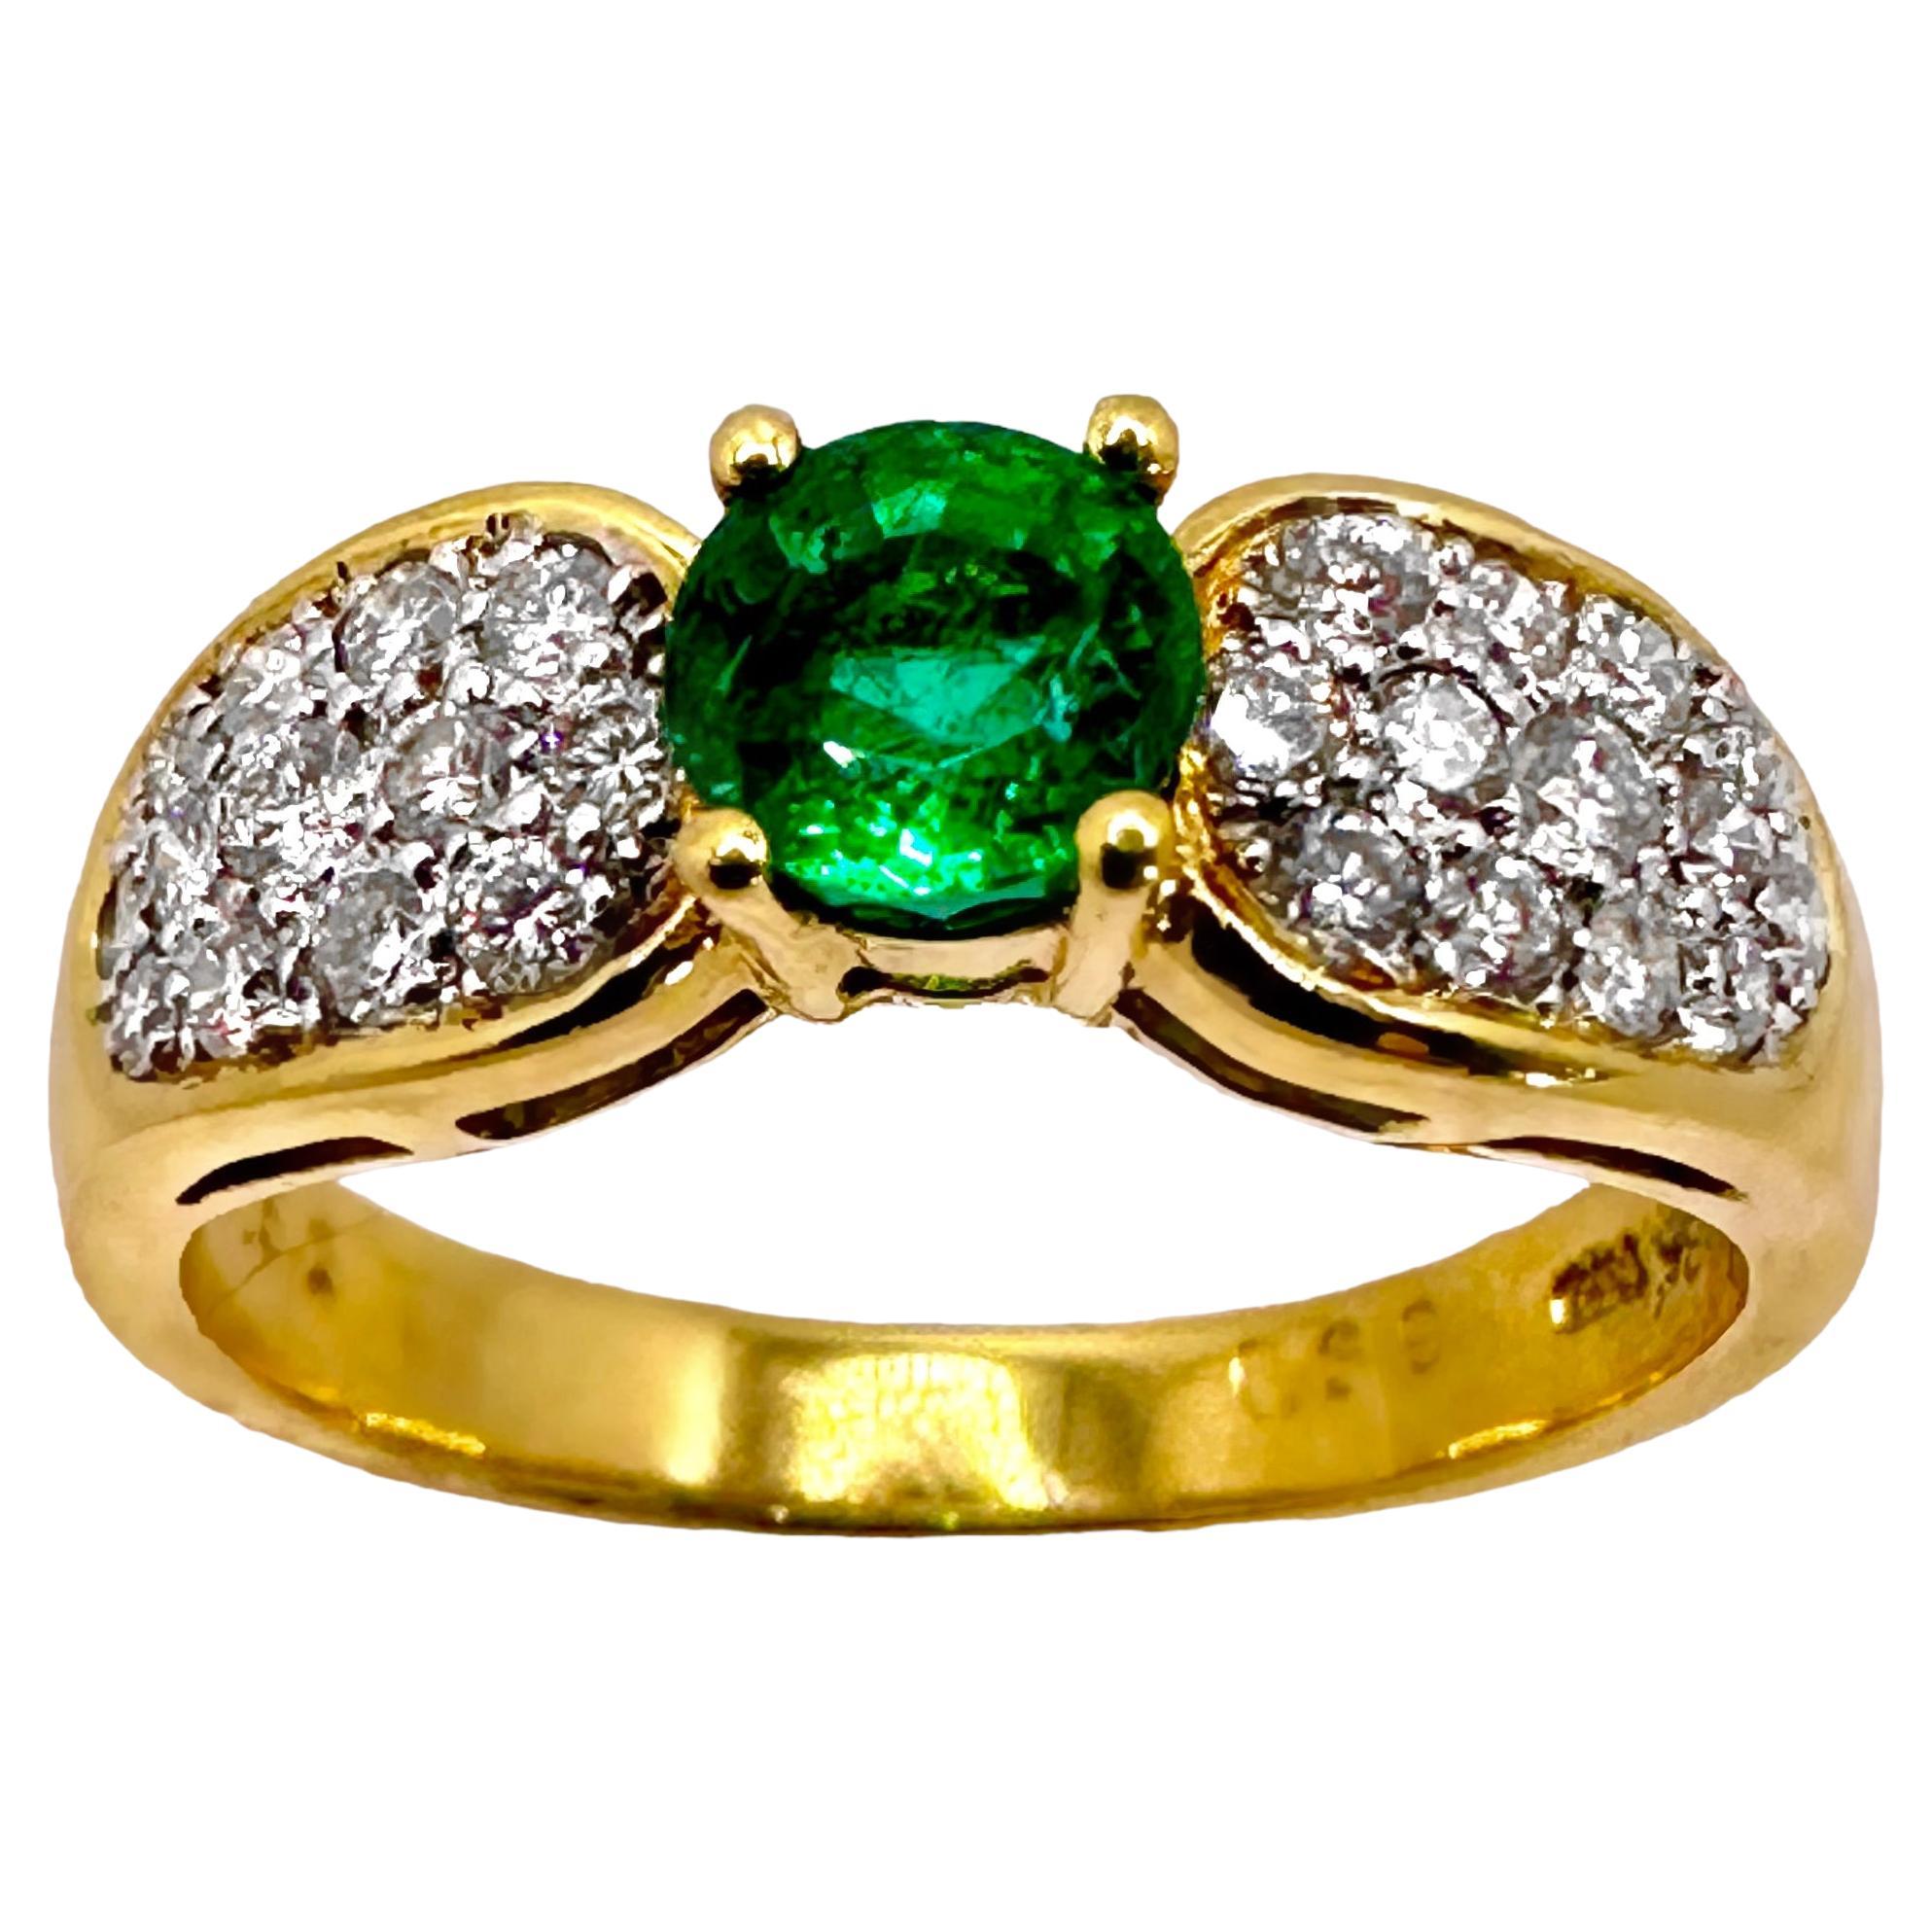 Petite and Elegant Emerald and Diamond Ring in 18k Yellow Gold